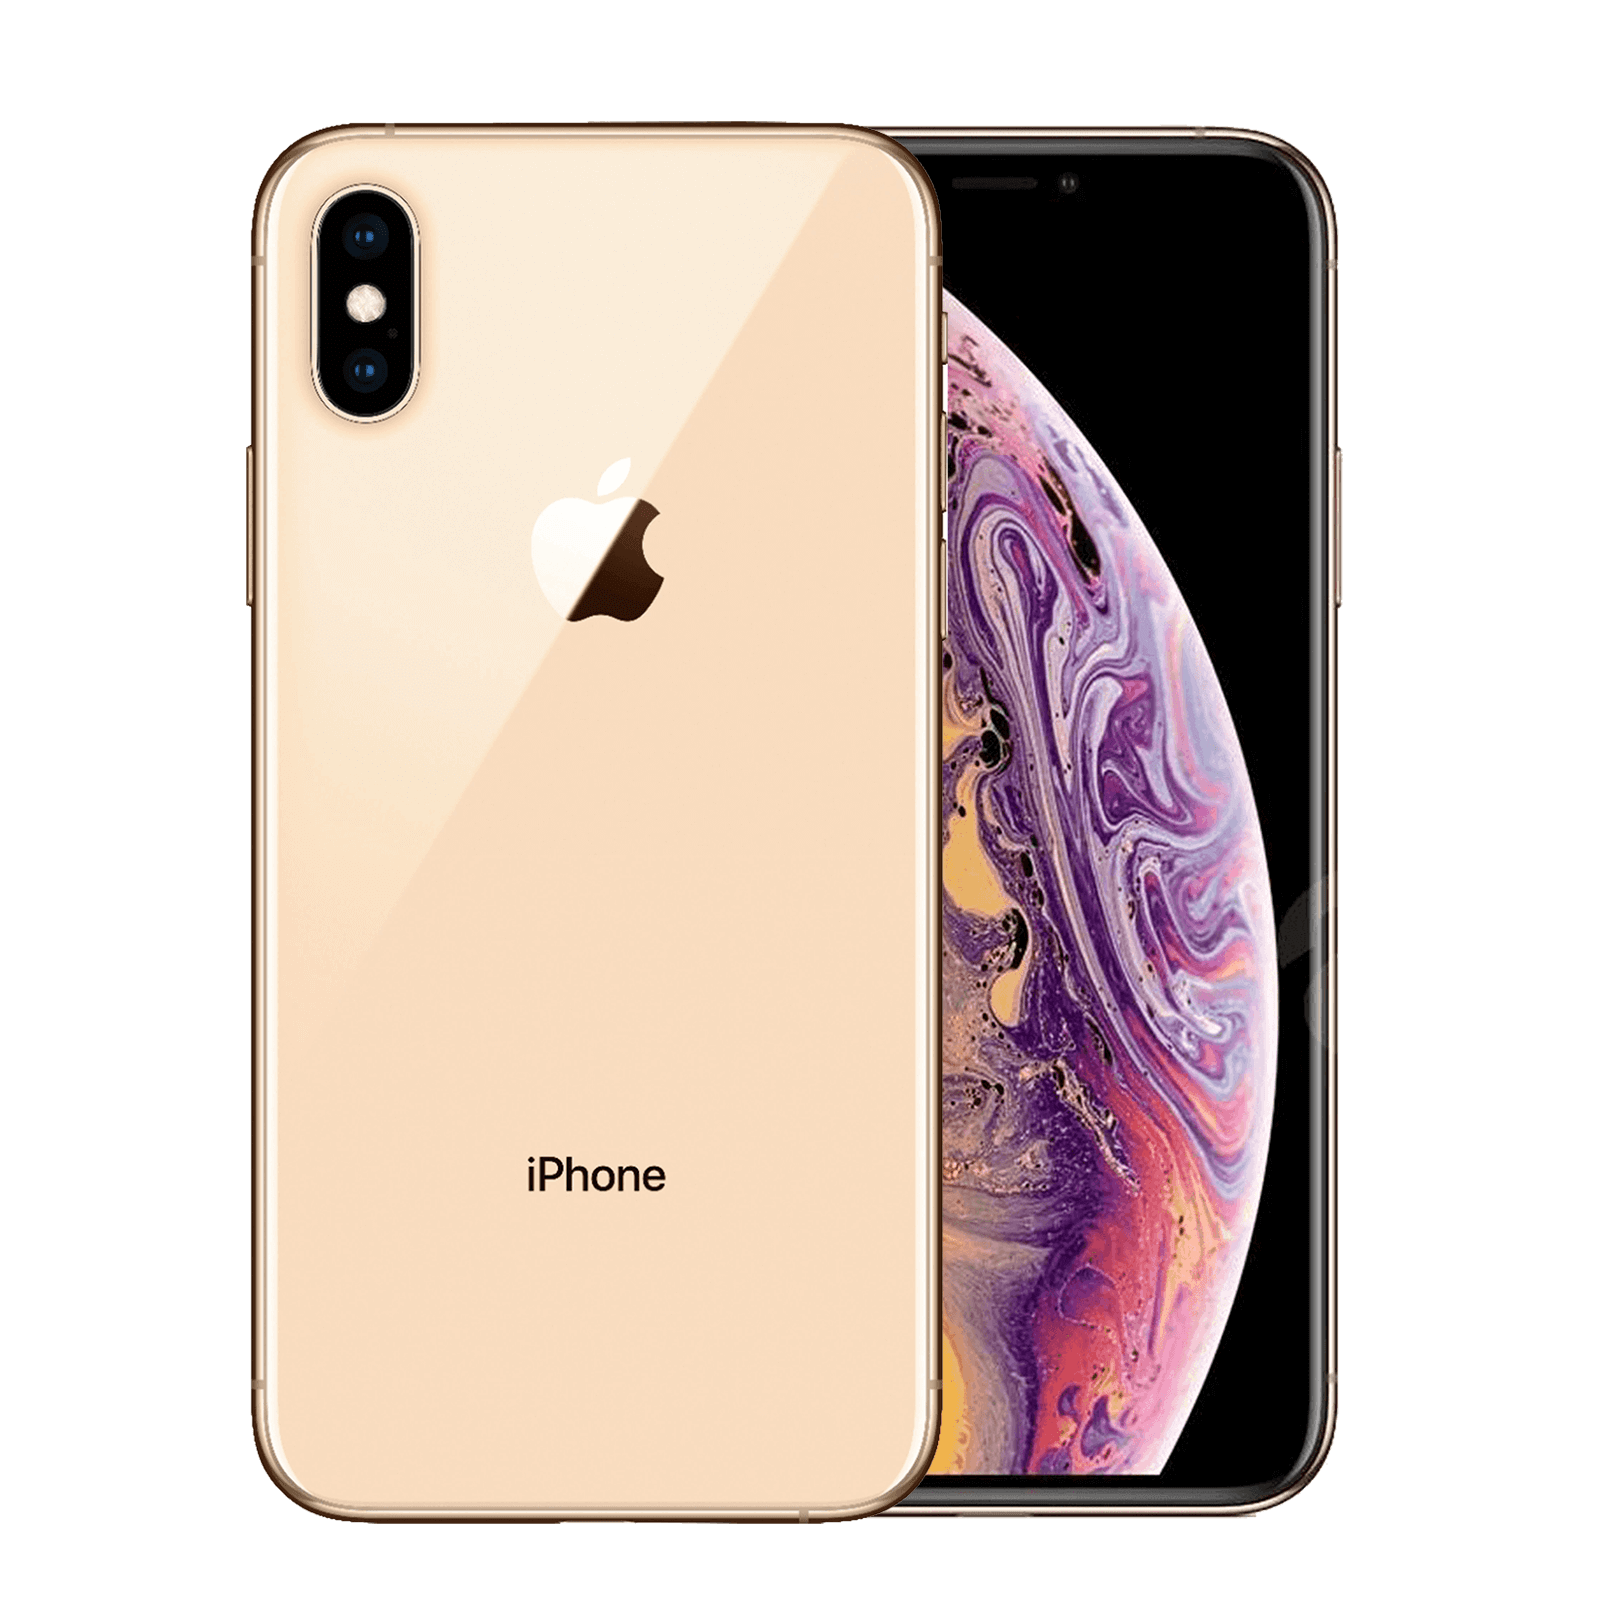 Apple iPhone XS Max 256GB Gold Very Good - AT&T